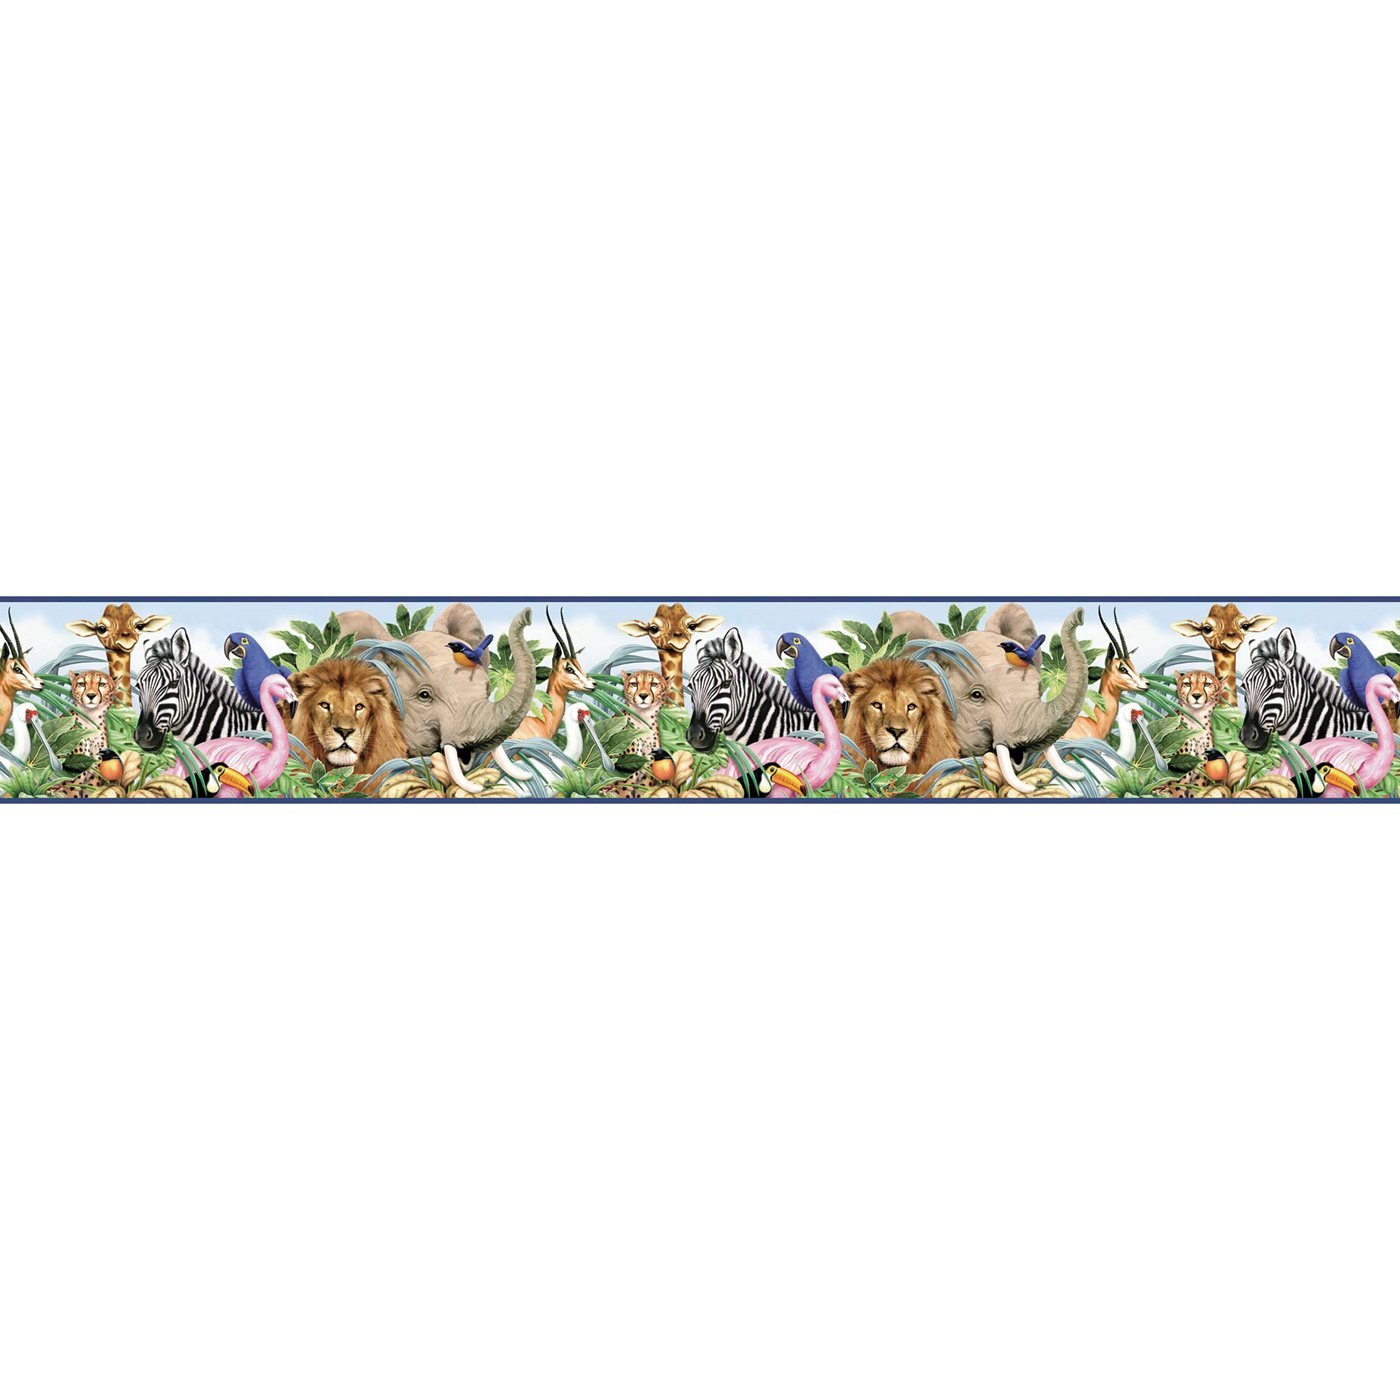  Freestyle Jungle Animals Pre Pasted Wallpaper Border ATG Stores